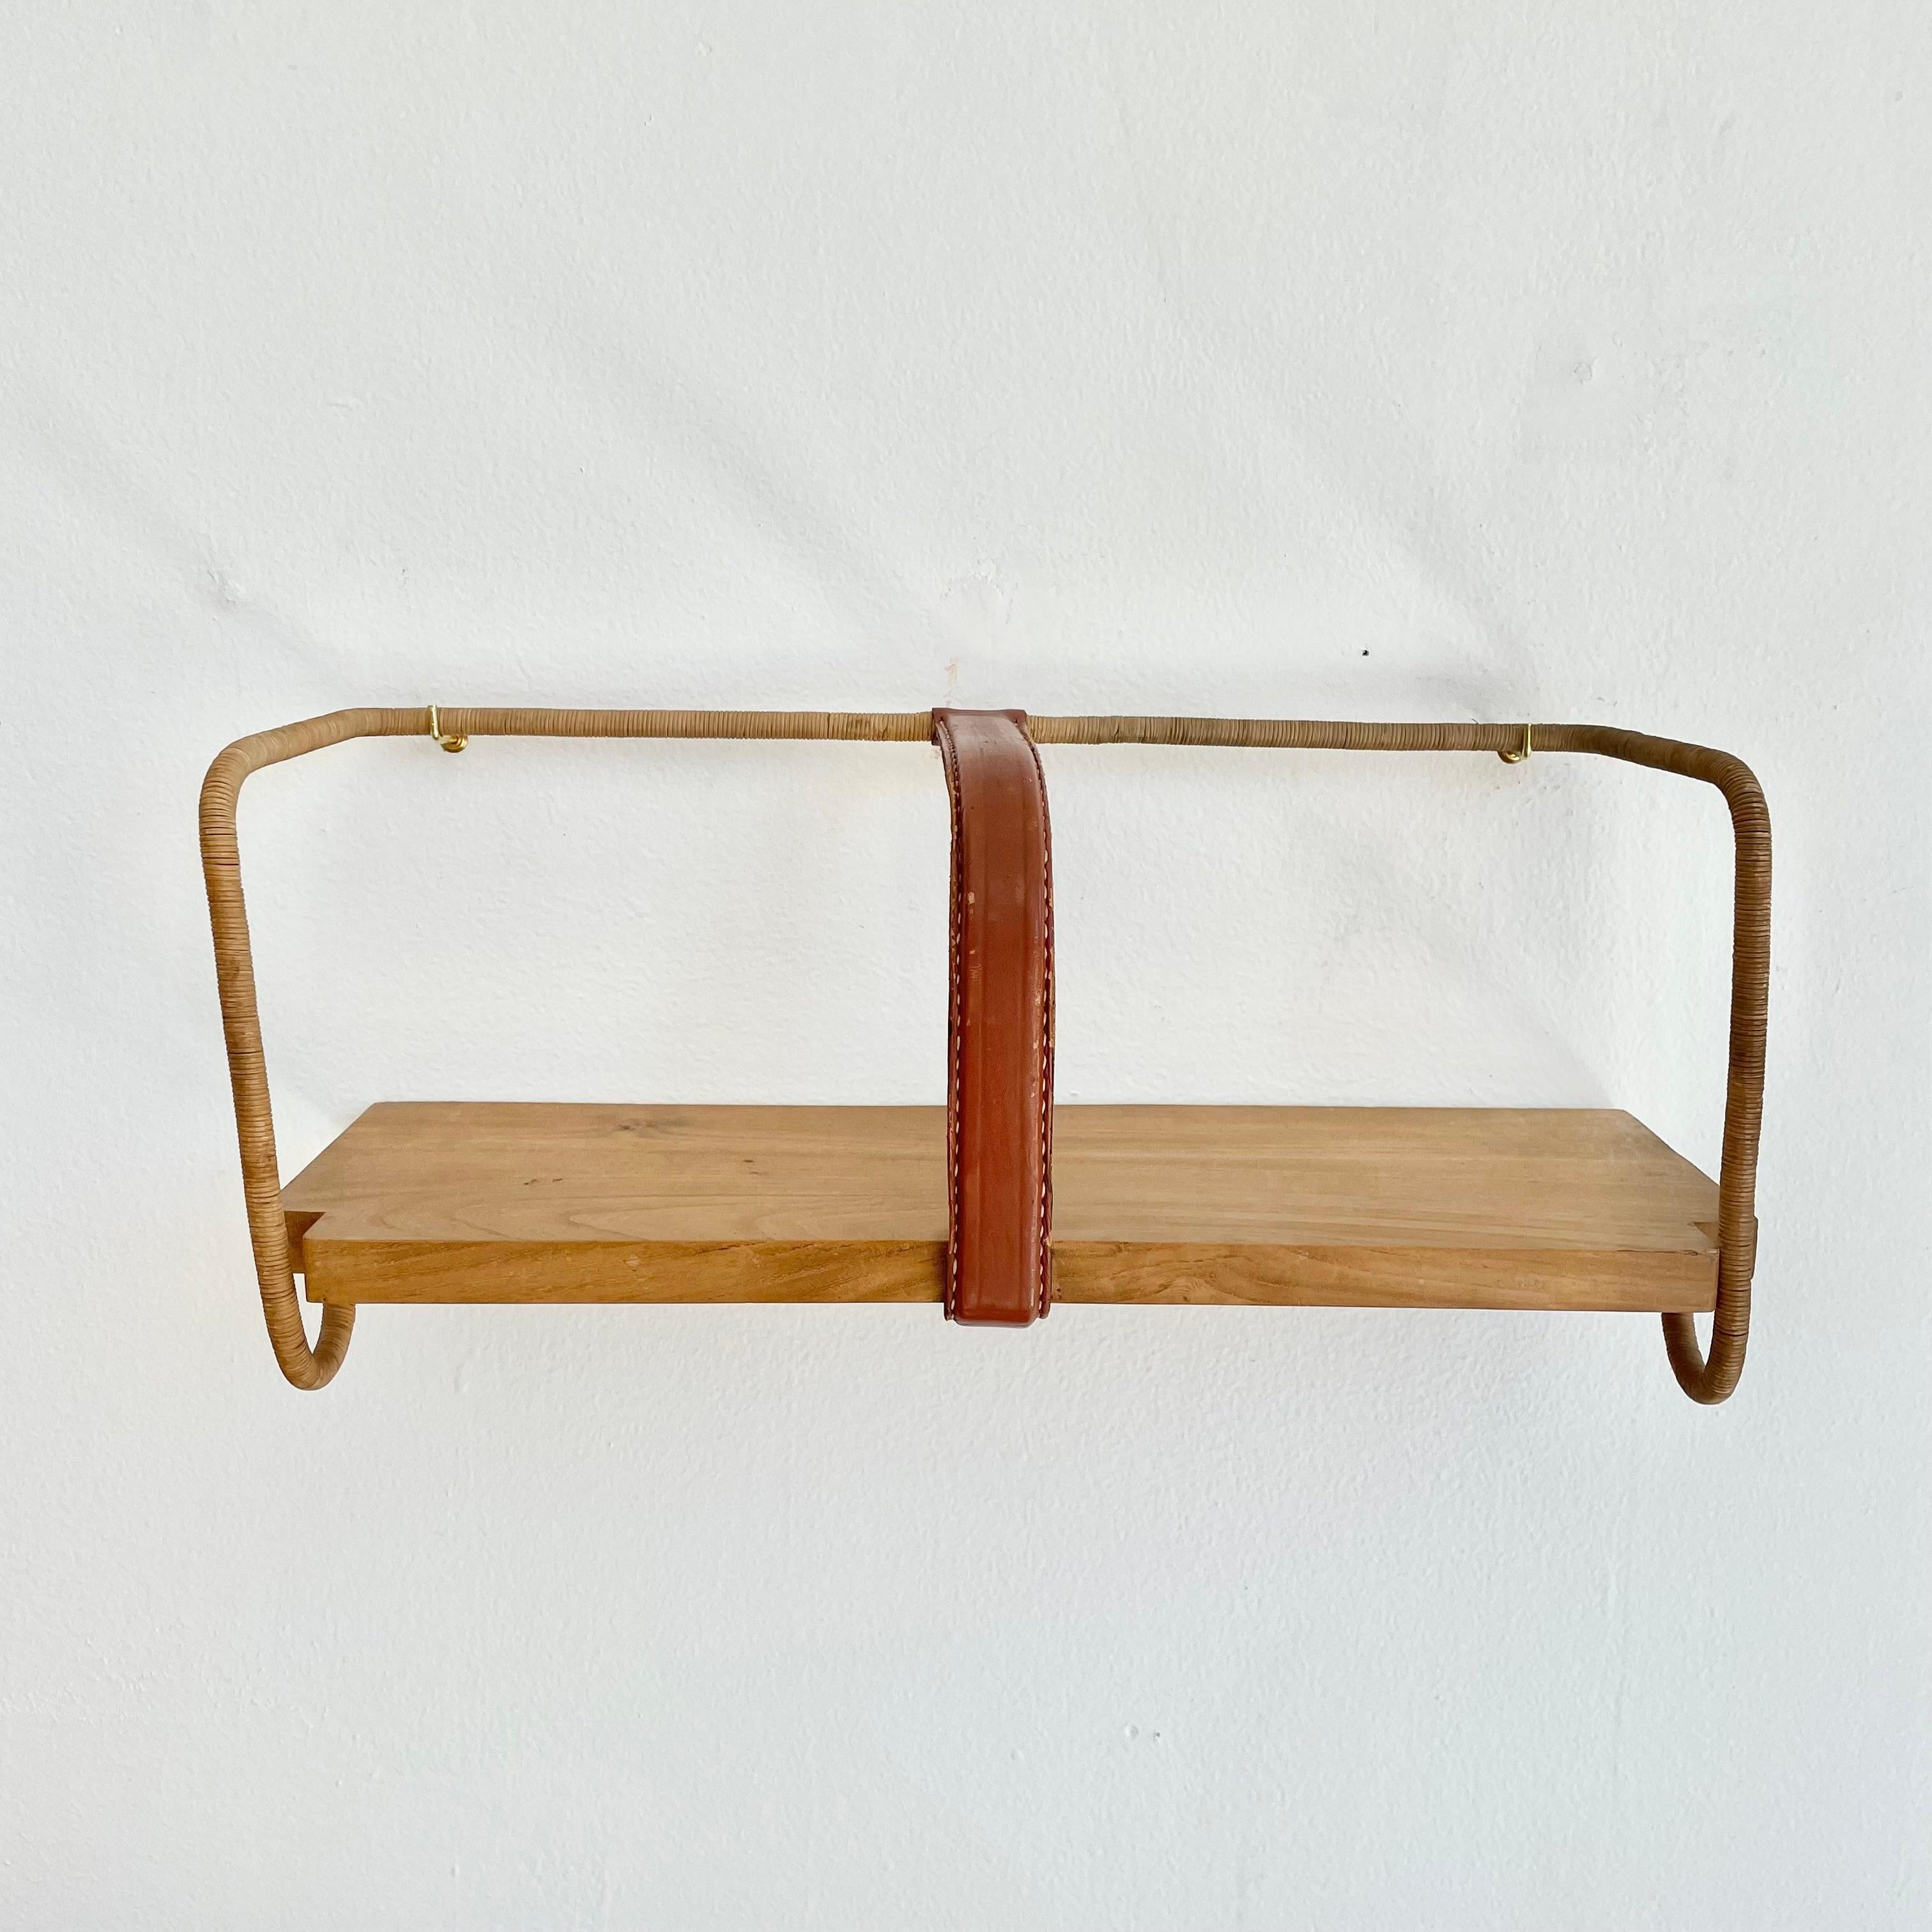 Jacques Adnet Leather, Wood and Twine Shelf, 1950s France For Sale 7